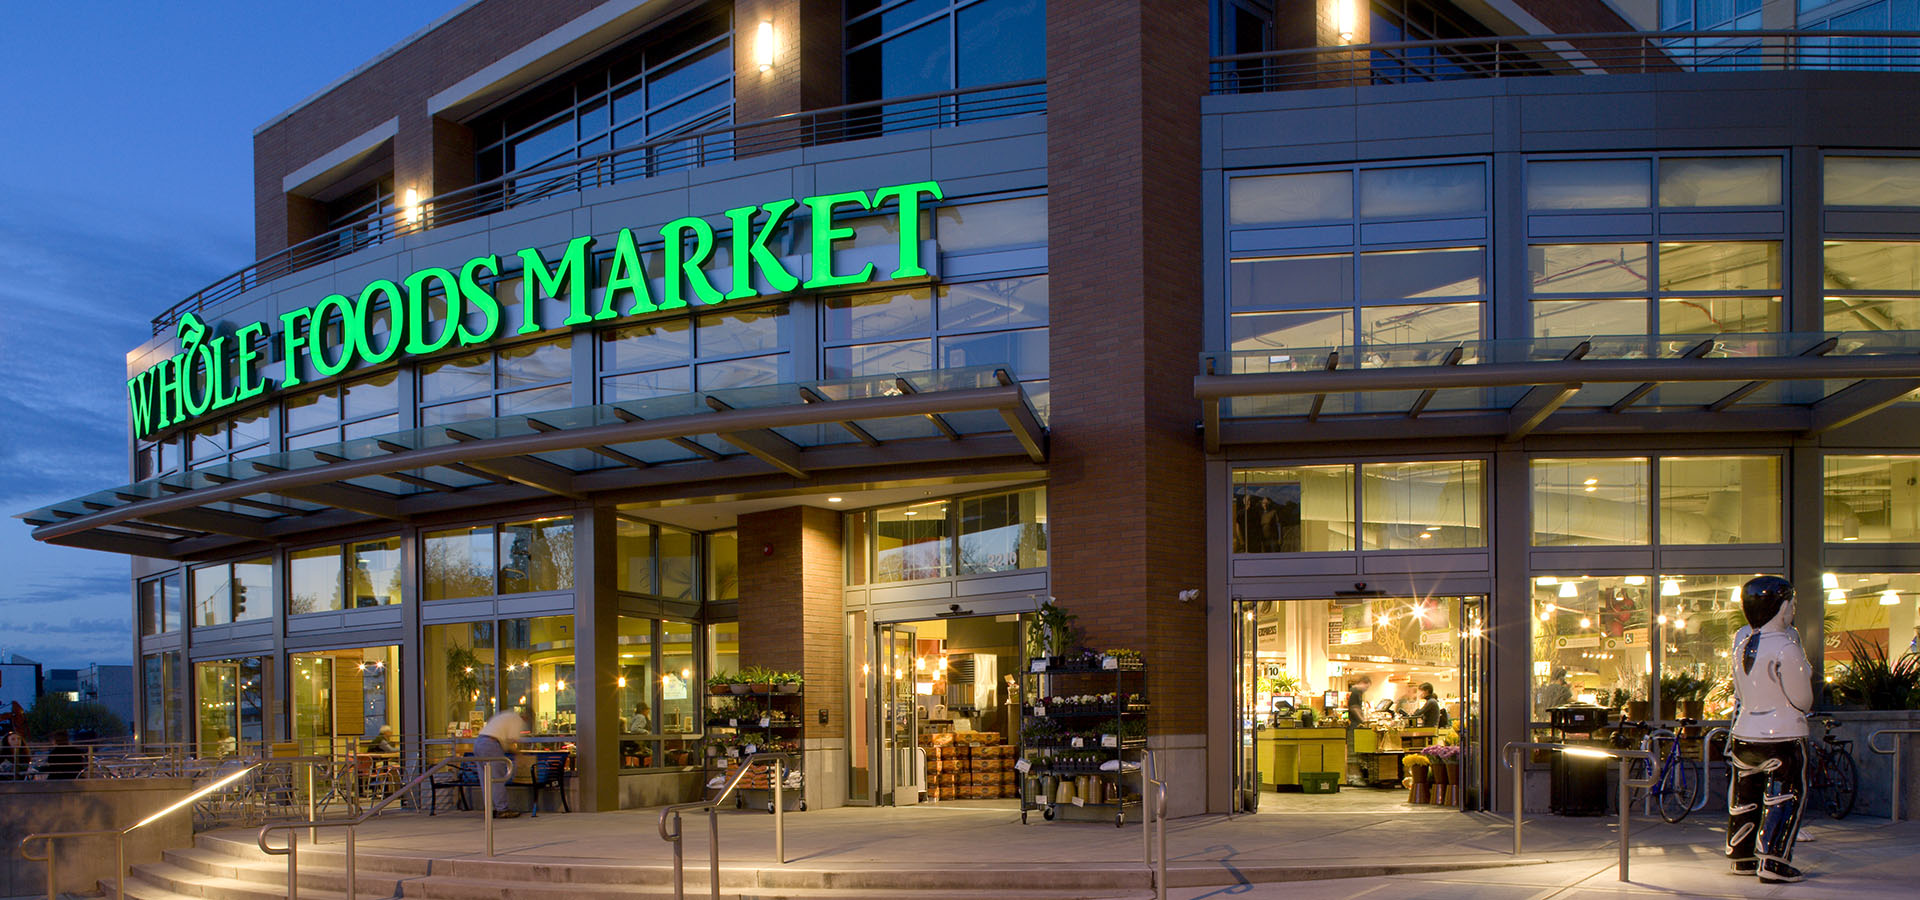 Whole Foods Market - Discover South Lake Union